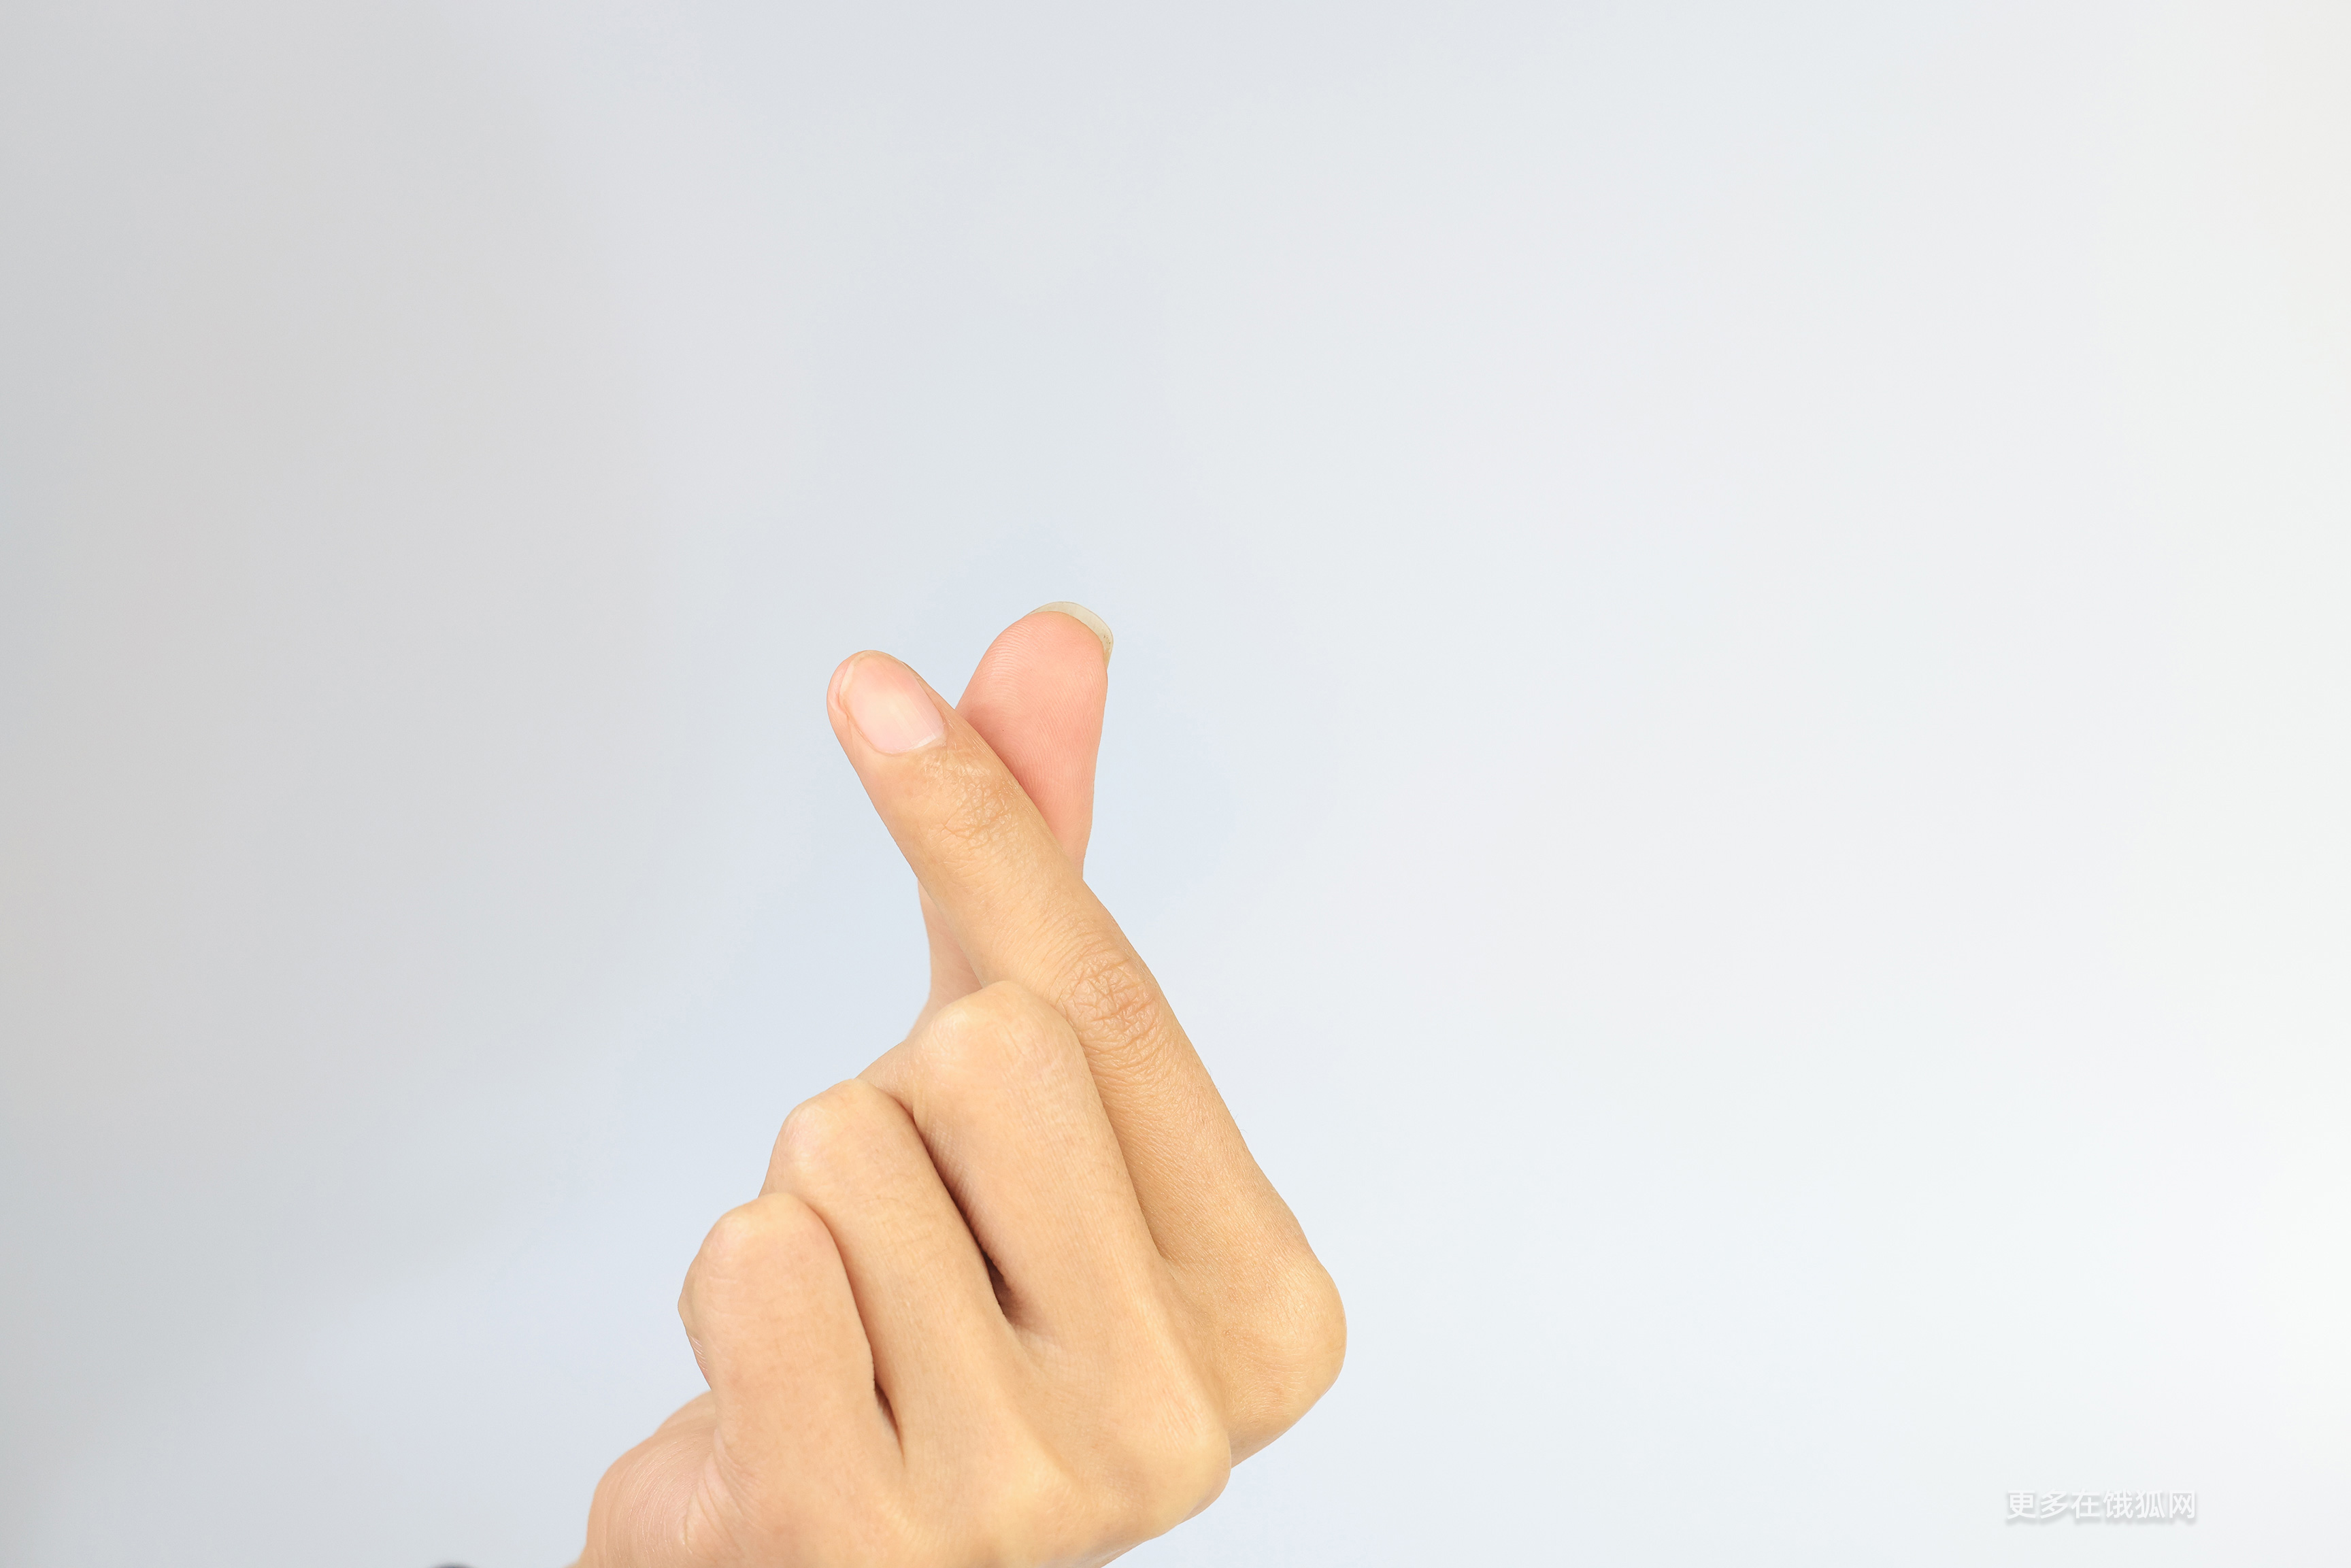 People 3456x2305 hand gesture hands simple background